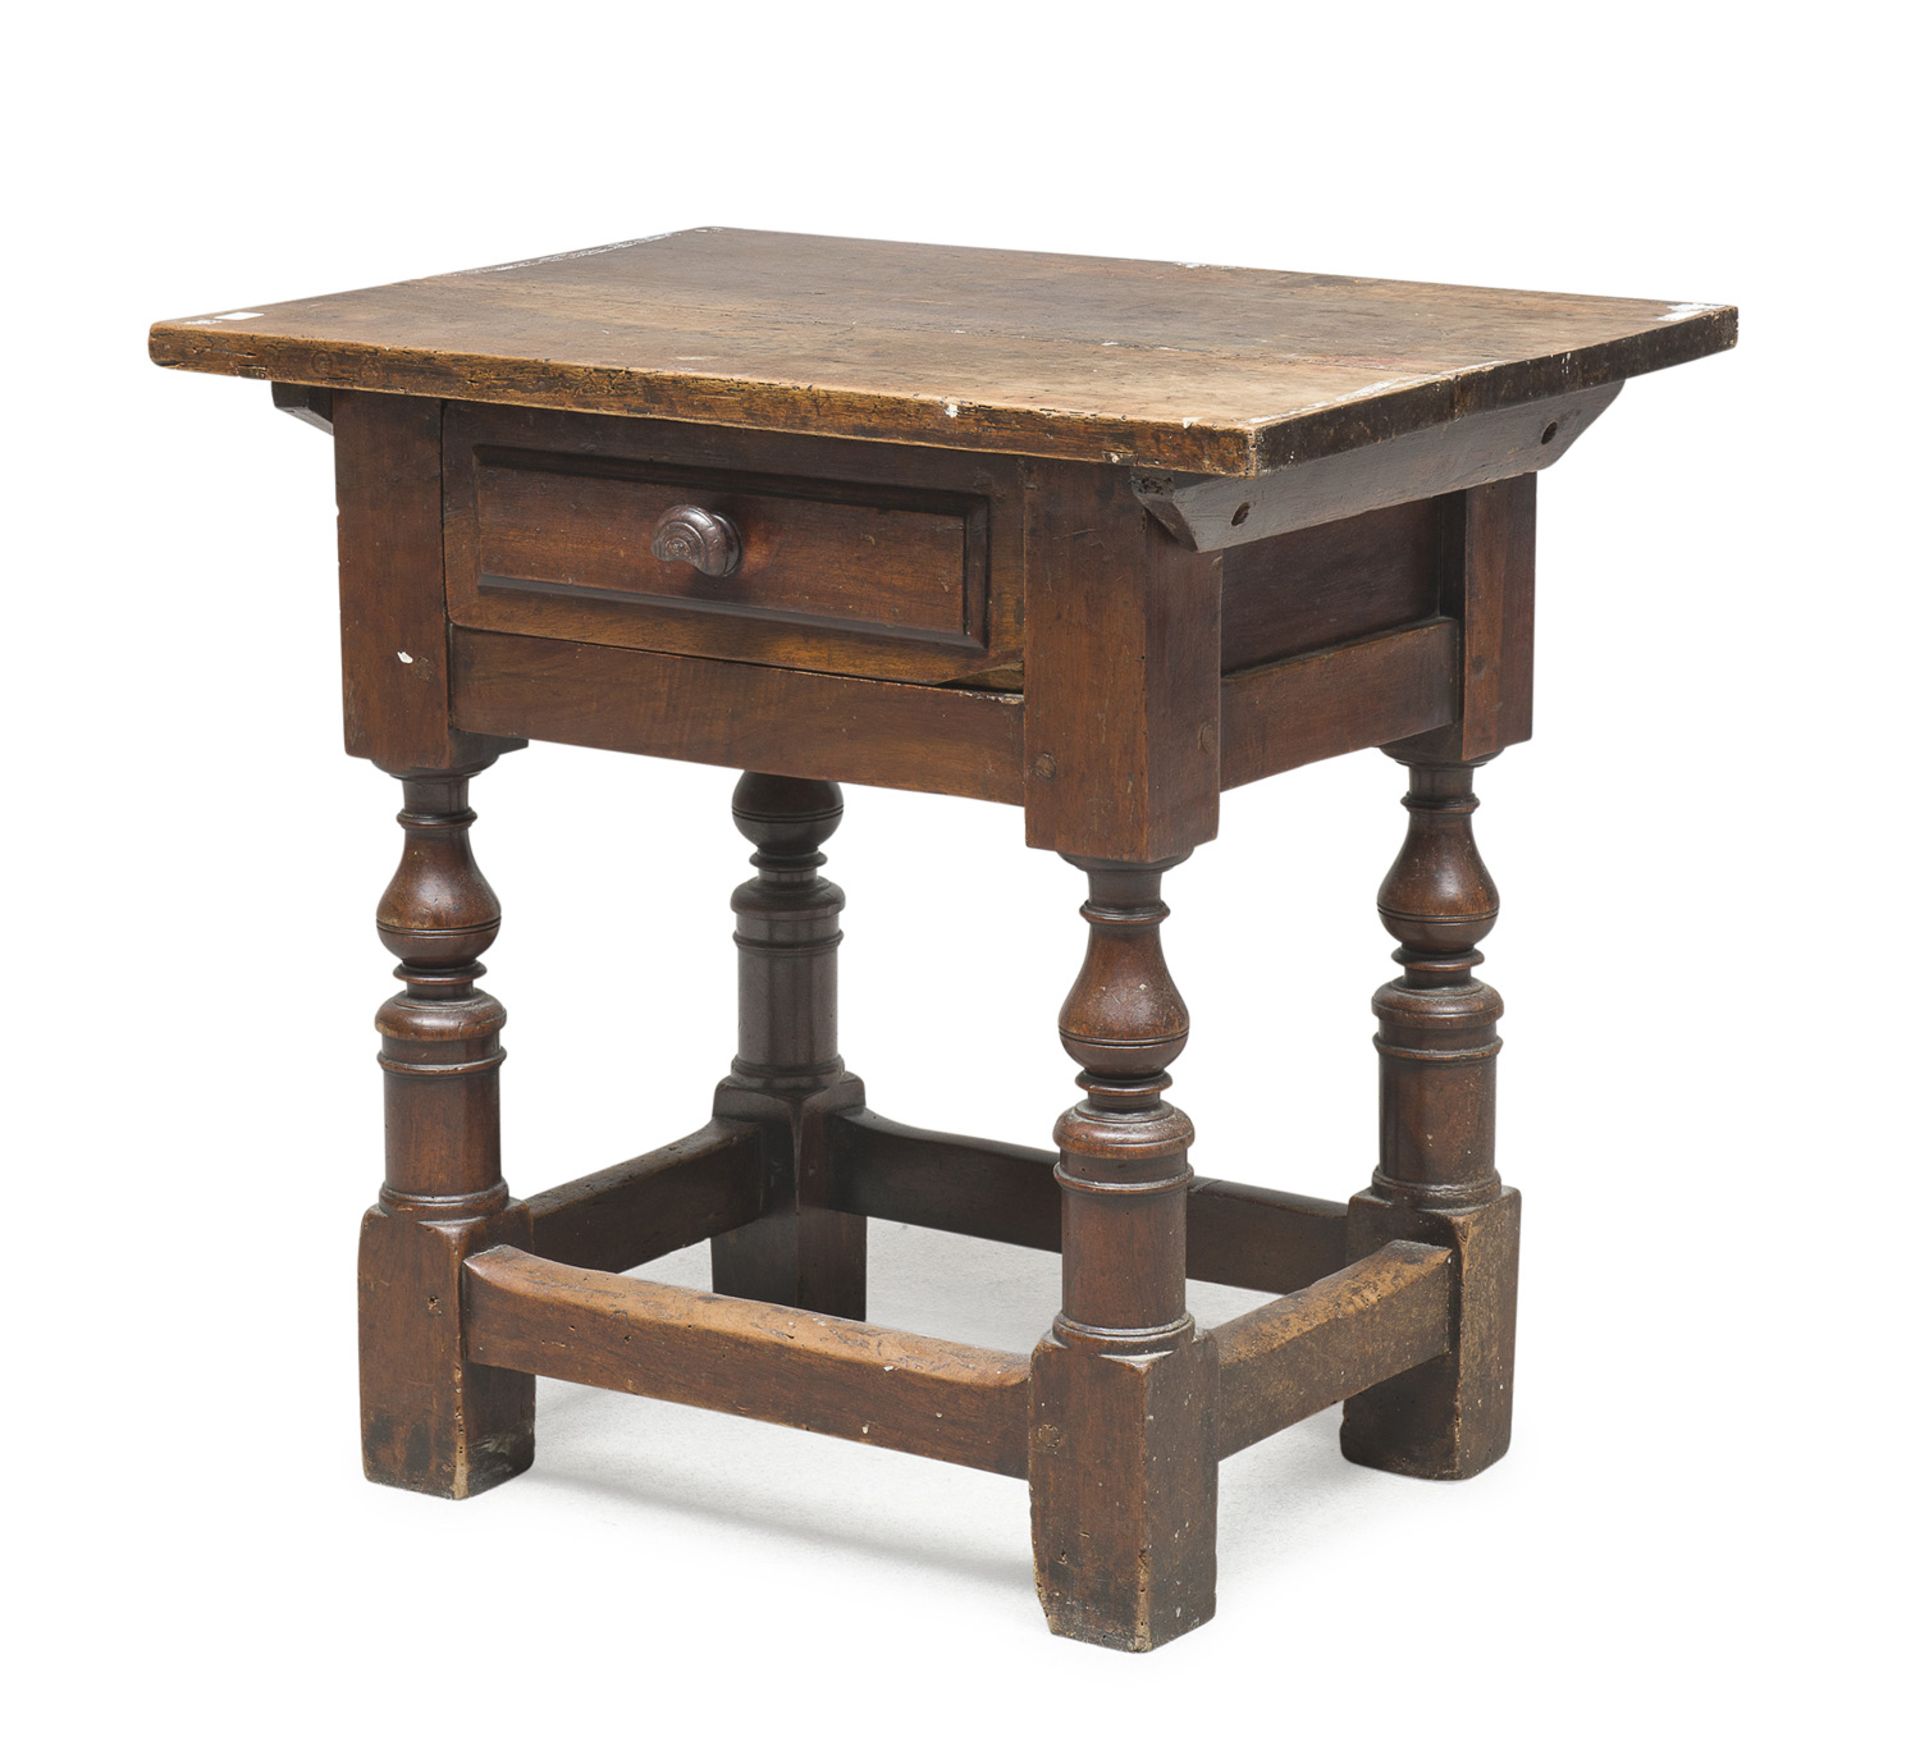 SMALL WALNUT TABLE CENTRAL ITALY WITH ANTIQUE ELEMENTS